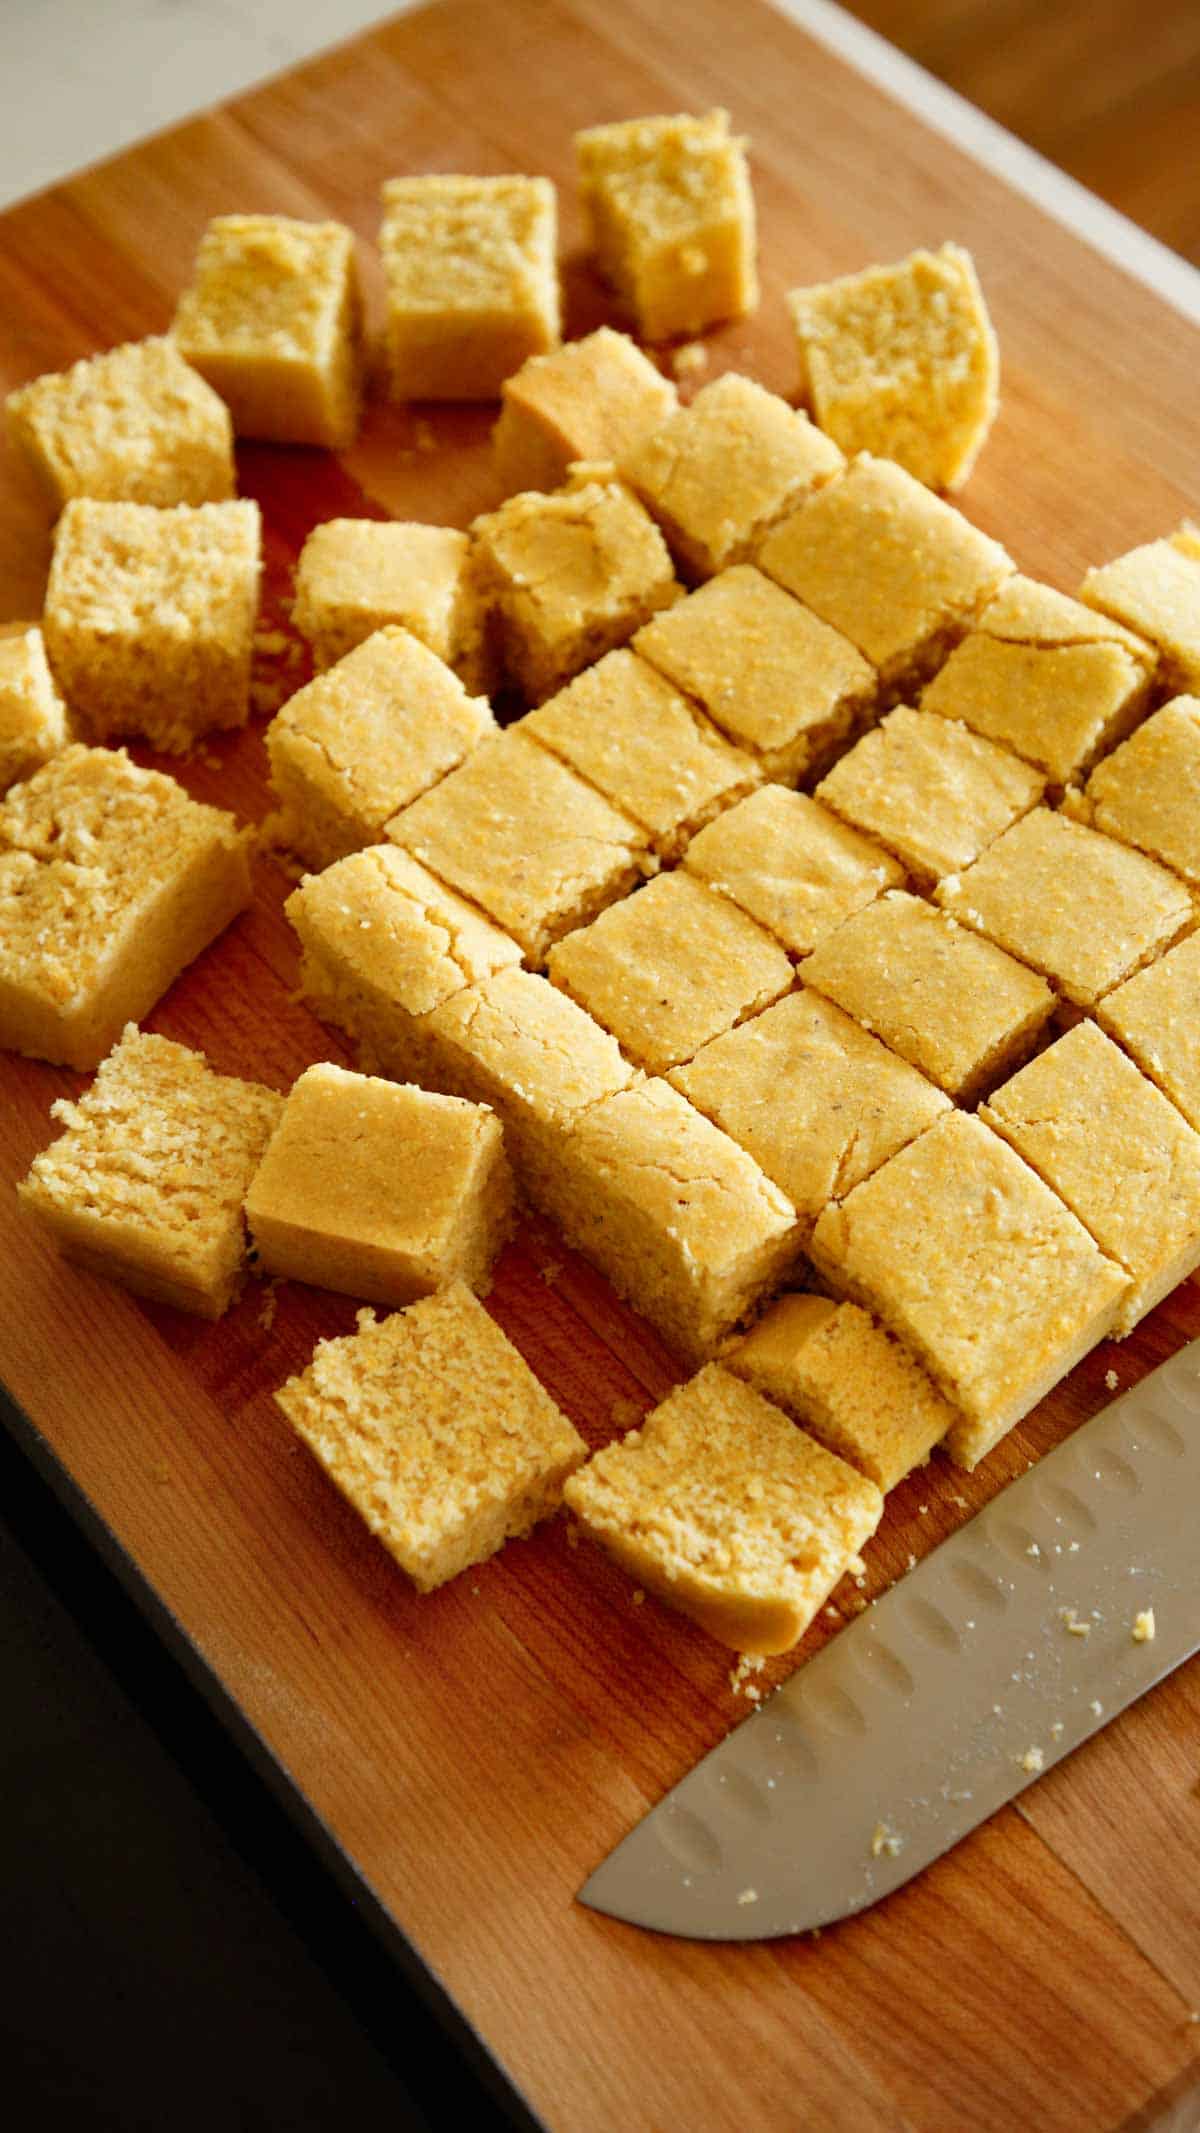 Freshly baked cornbread on a cutting board sliced into small cubes